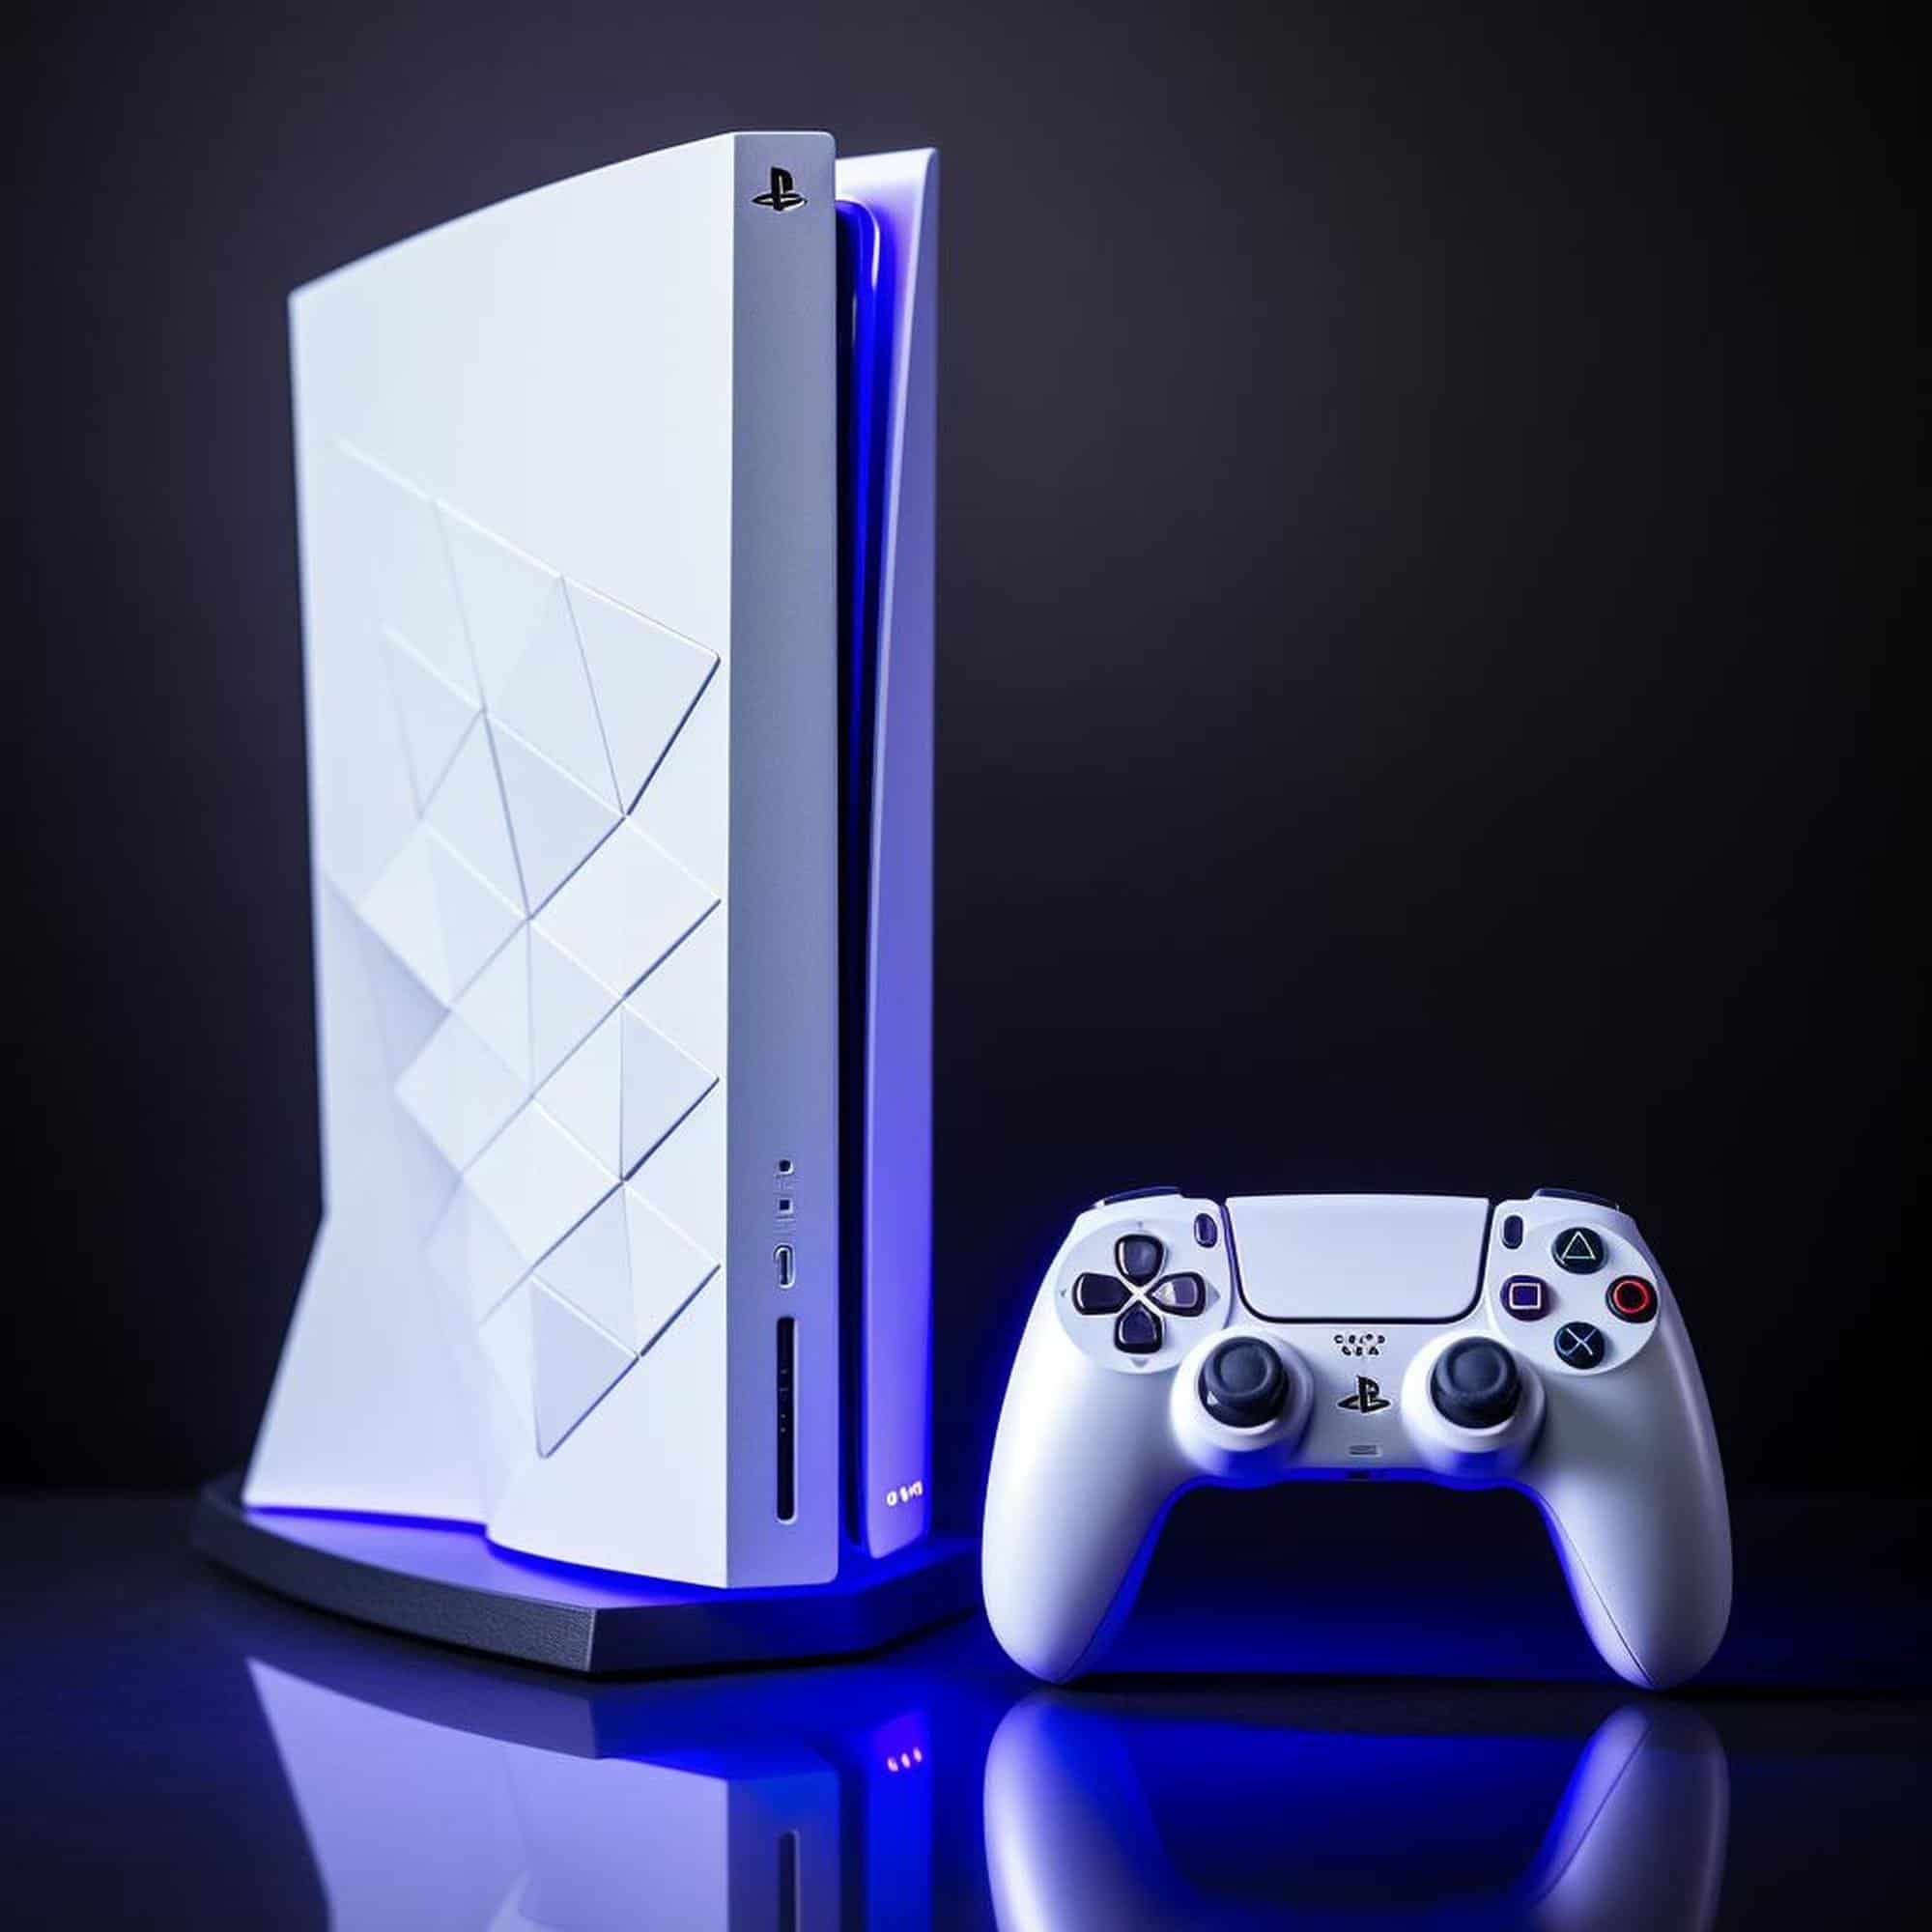 Choosing the best gaming console